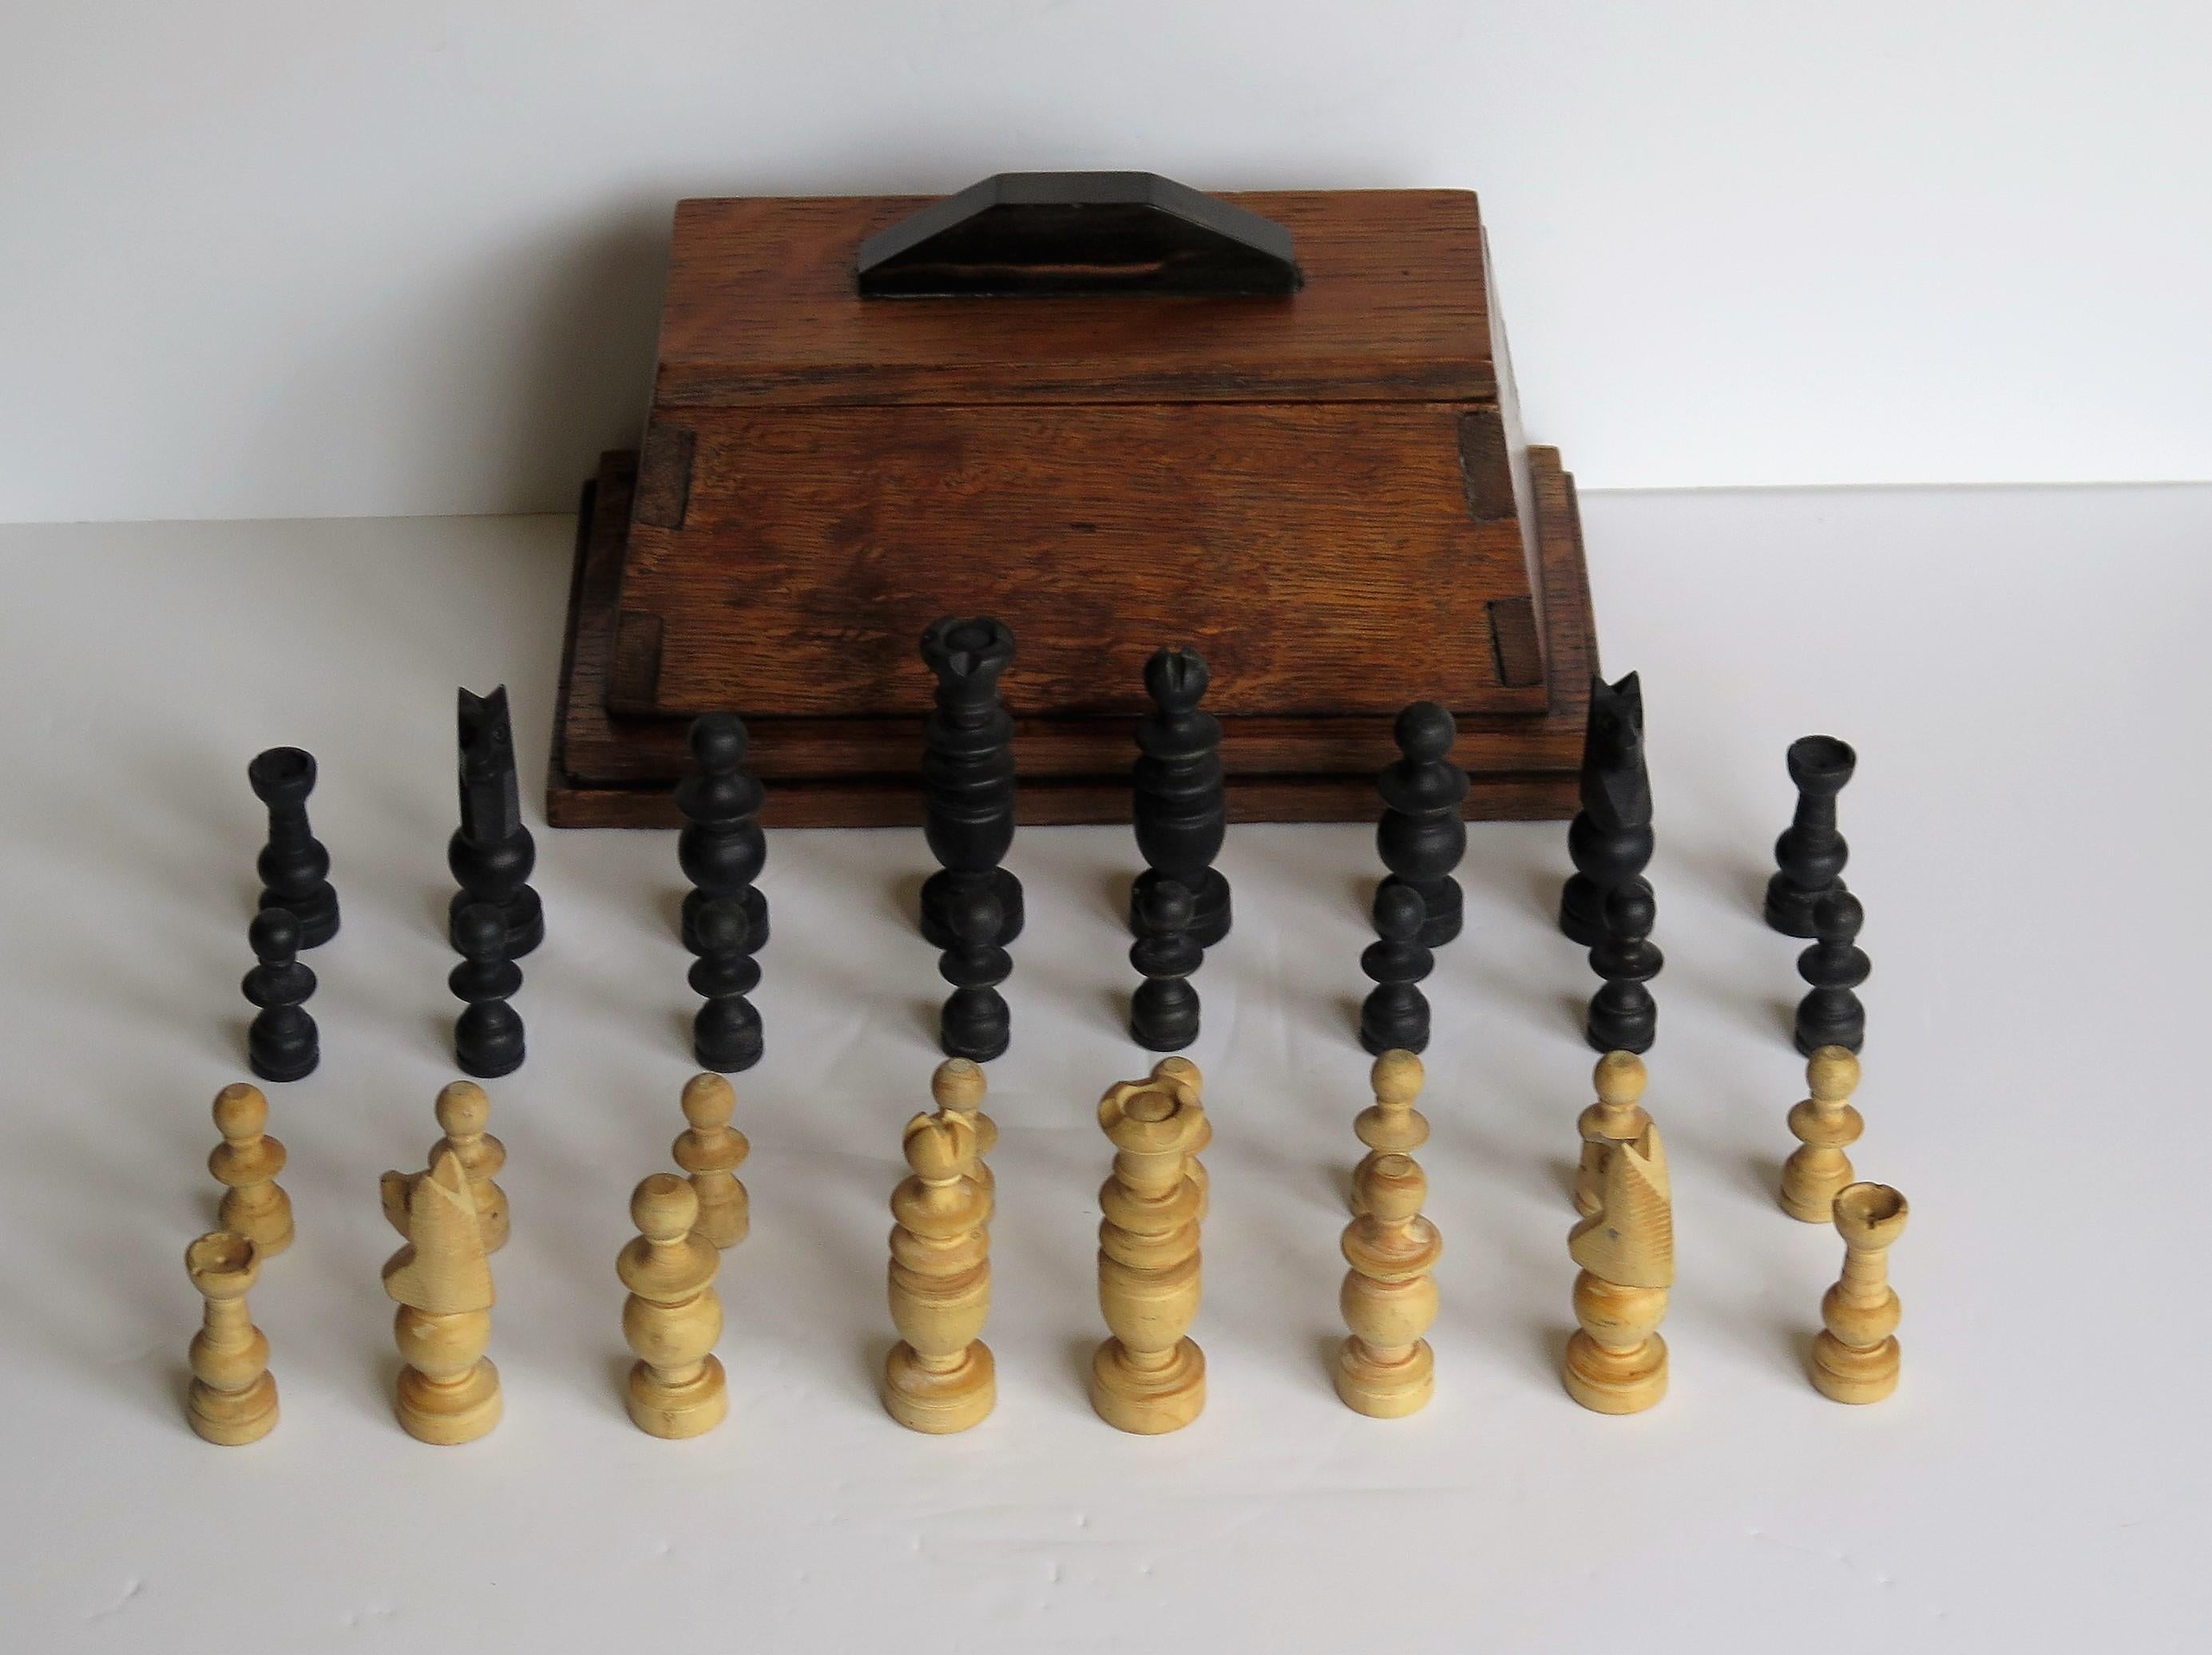 This is a good and complete handmade chess set game of 32 pieces in an Oak Lidded Box, probably made as an 